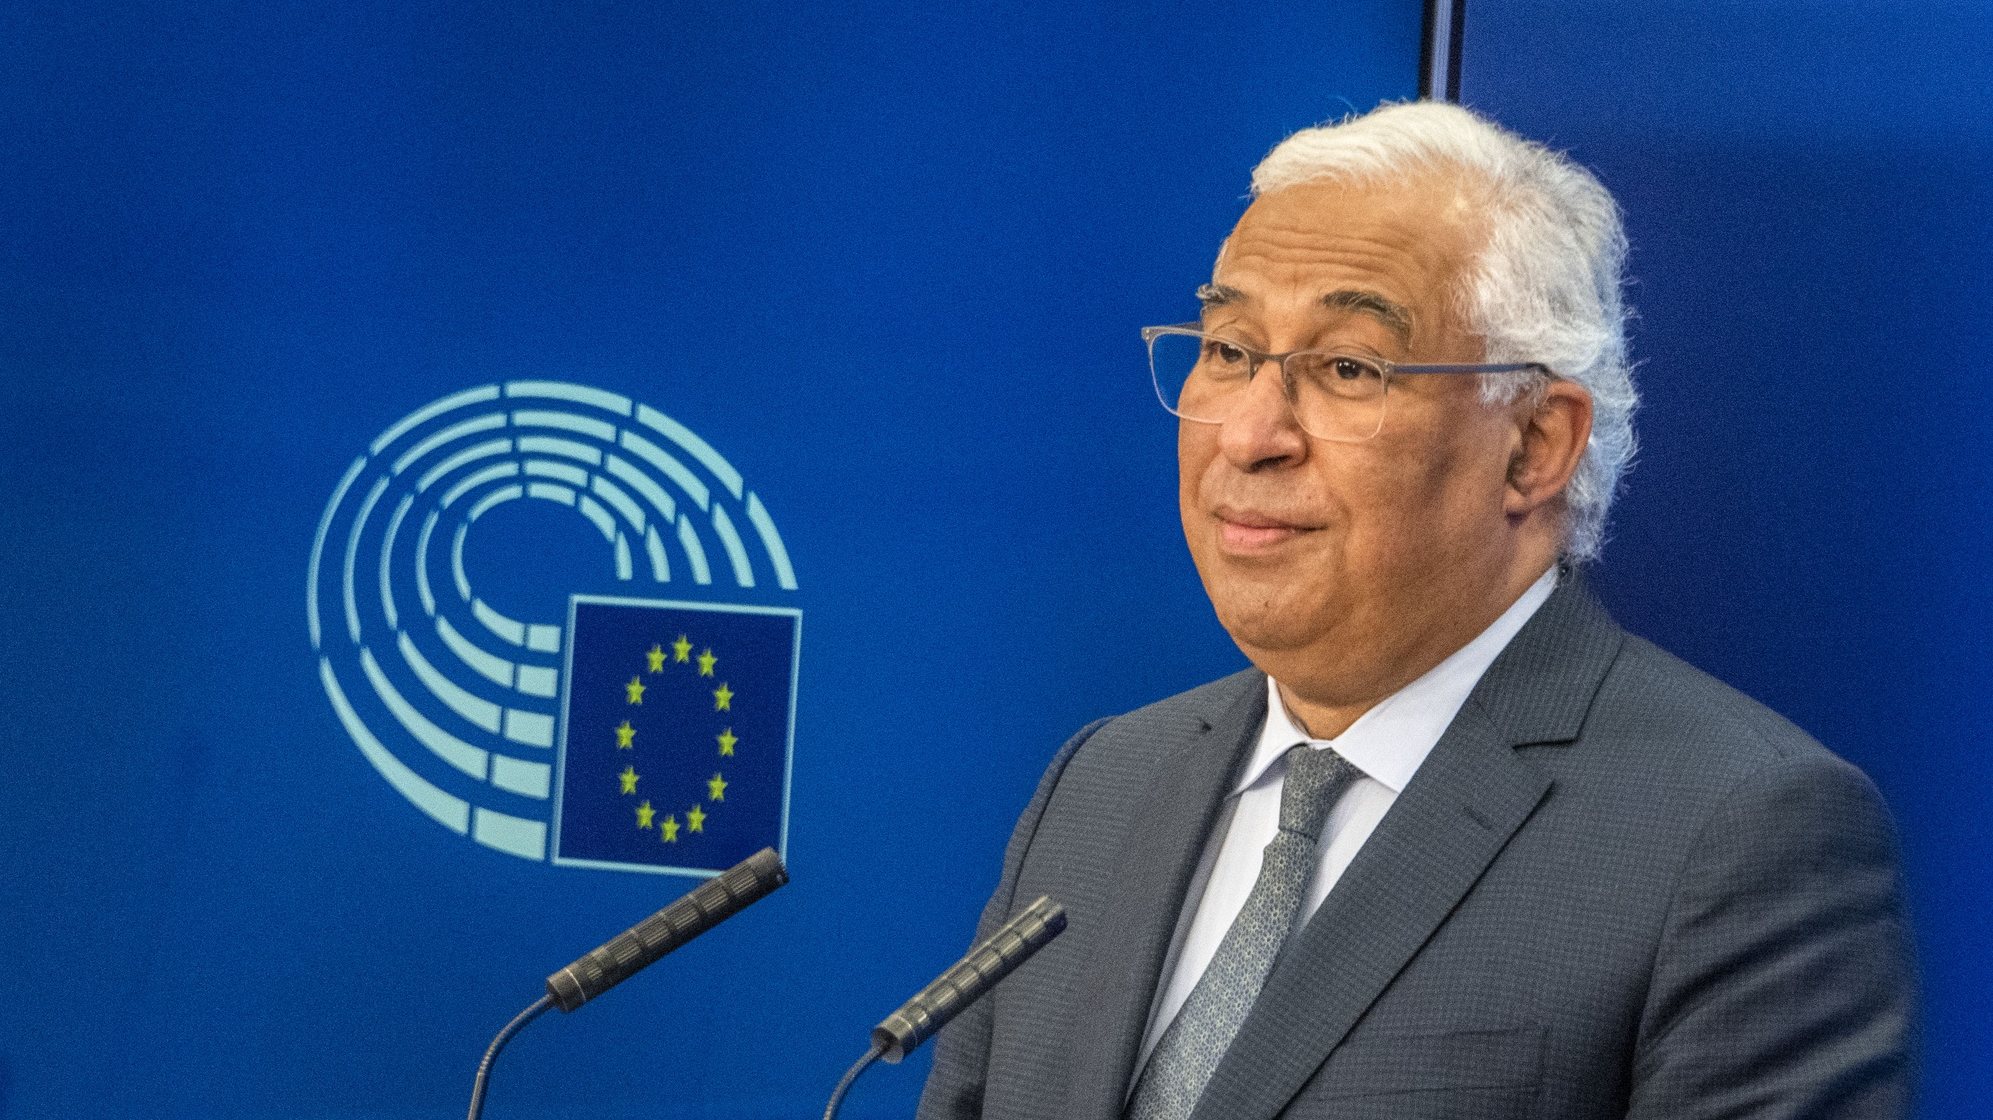 Portugal&#039;s Prime Minister Antonio Costa attends a press conference after signing the Recovery and Resilience Facility (RRF) agreement in Brussels, Belgium, 12 February 2021. The European Parliament greenlighted the EU&#039;s proposed Recovery and Resilience Facility (RRF), worth 672.5 billion euros to tackle the economic aftermath of the coronavirus pandemic, during its plenary session in Brussels on 10 February 2021. TONY DA SILVA/LUSA